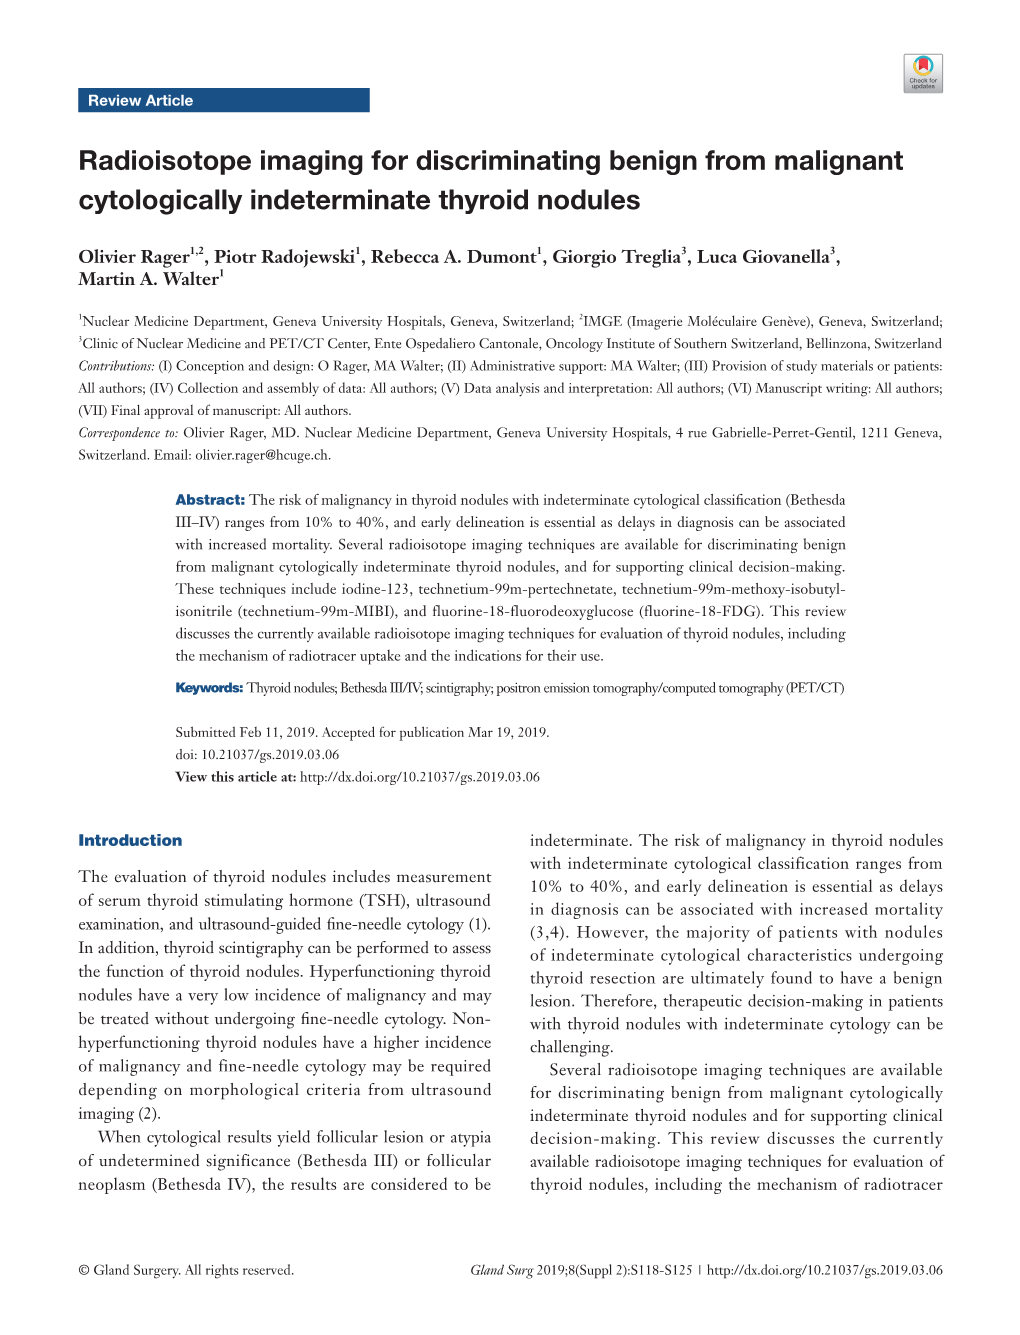 Radioisotope Imaging for Discriminating Benign from Malignant Cytologically Indeterminate Thyroid Nodules